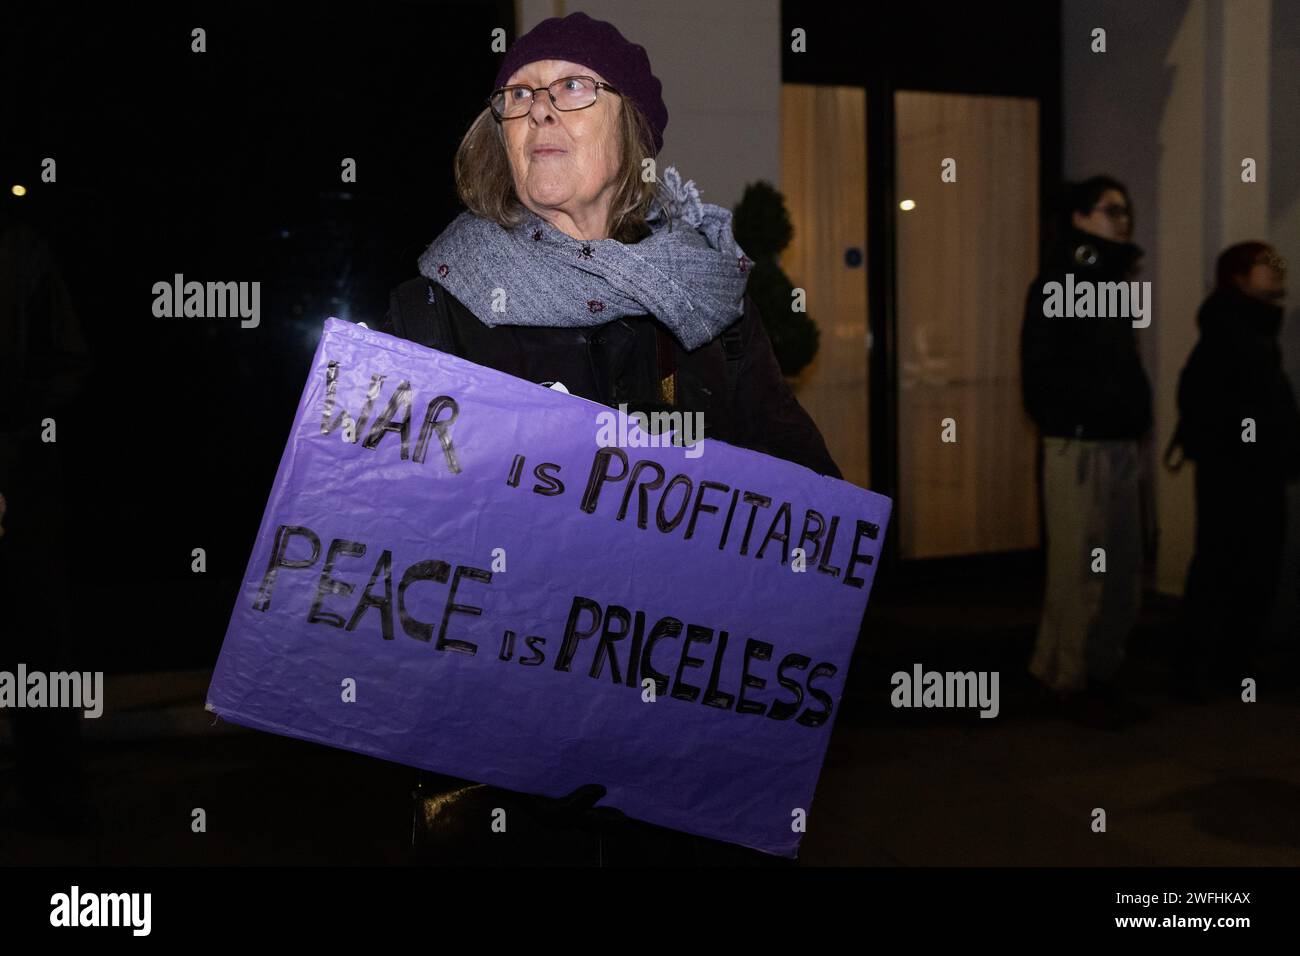 London, UK. 30th January, 2024. A campaigner against the arms trade protests outside the JW Marriott Grosvenor House Hotel on the occasion of the ADS Annual Dinner. The ADS Annual Dinner brings together representatives of companies from the UK's aerospace, defence, security and space industries. Sponsors of the event include BAE Systems which supplies components for F-35 combat aircraft used by Israel during its invasion of Gaza. Credit: Mark Kerrison/Alamy Live News Stock Photo